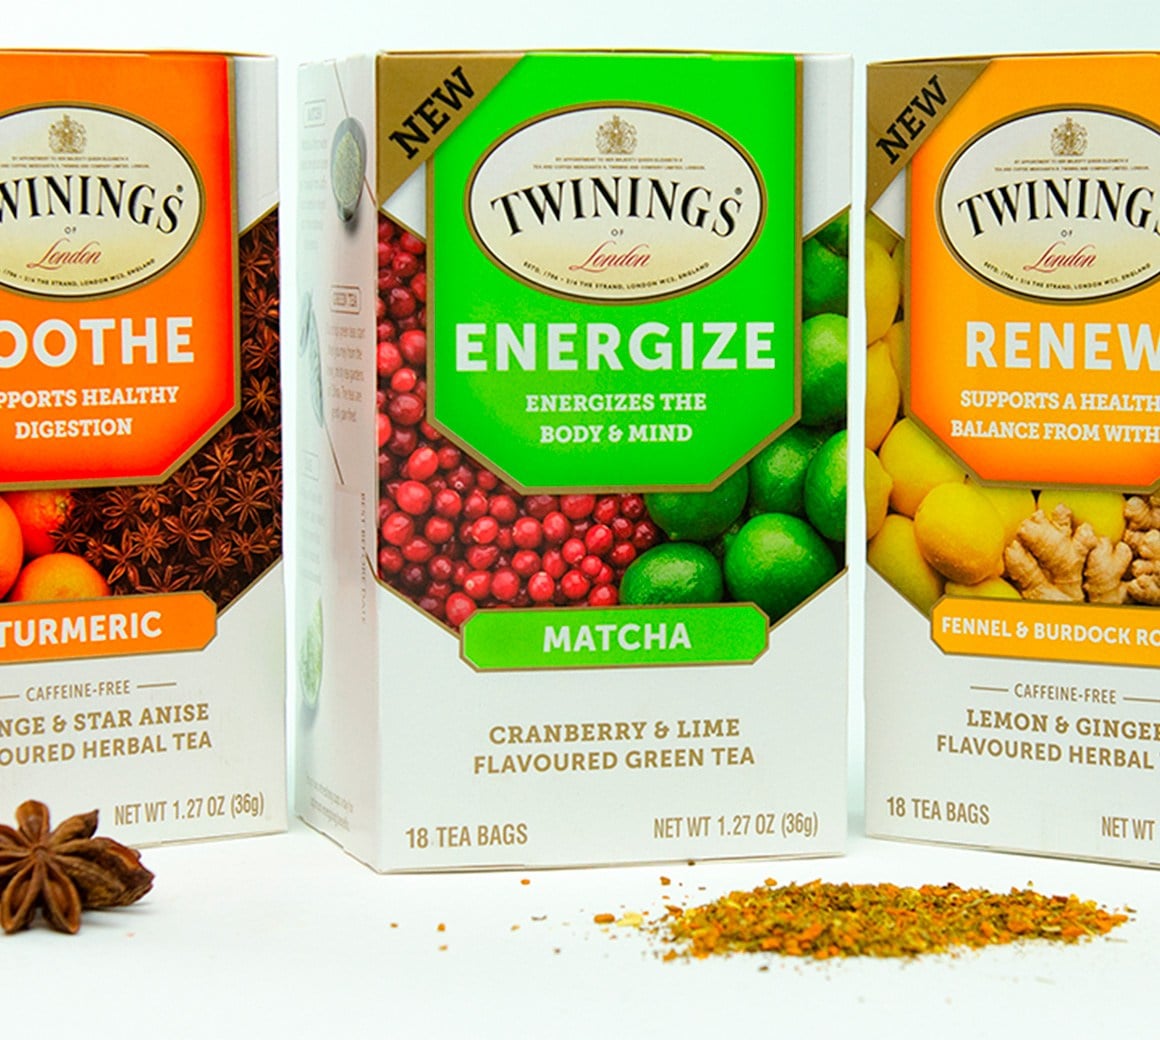 Bailey Brand consulting twinings tea